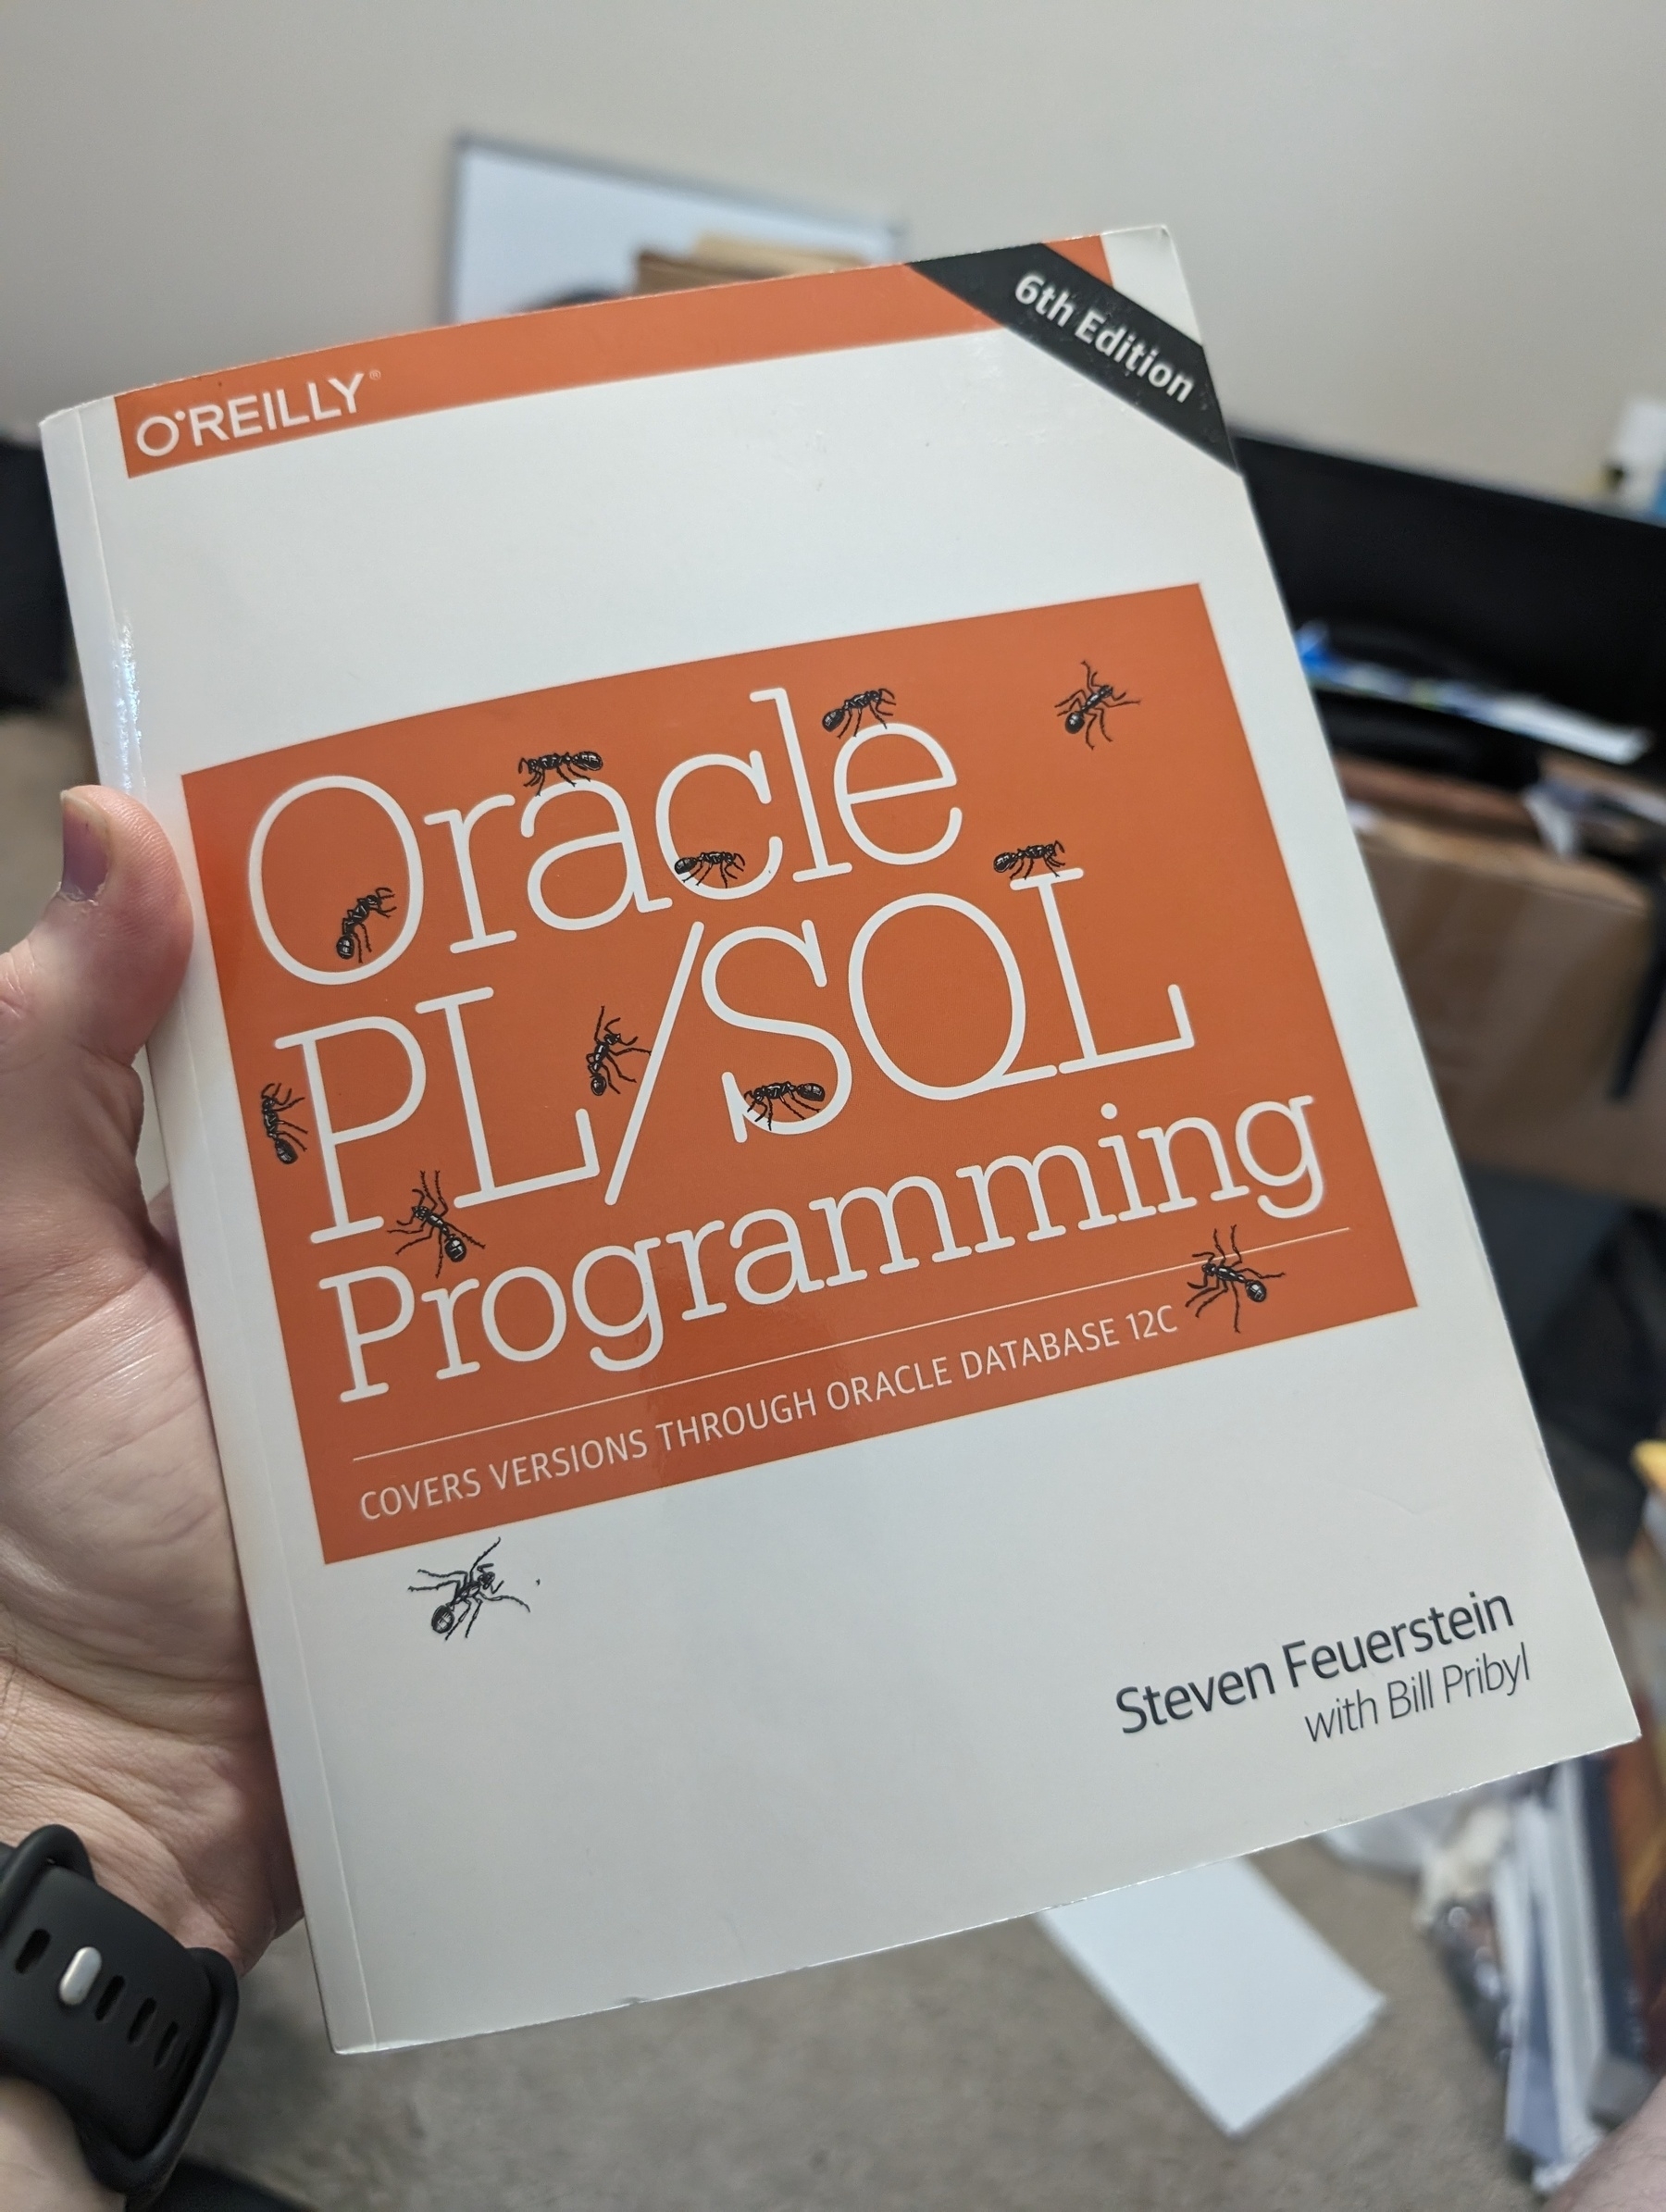 Photo of book: Oracle PL/SQL Programming, sixth edition, by Steven Feuerstein with Bill Pribyl. From O'Reilly books.